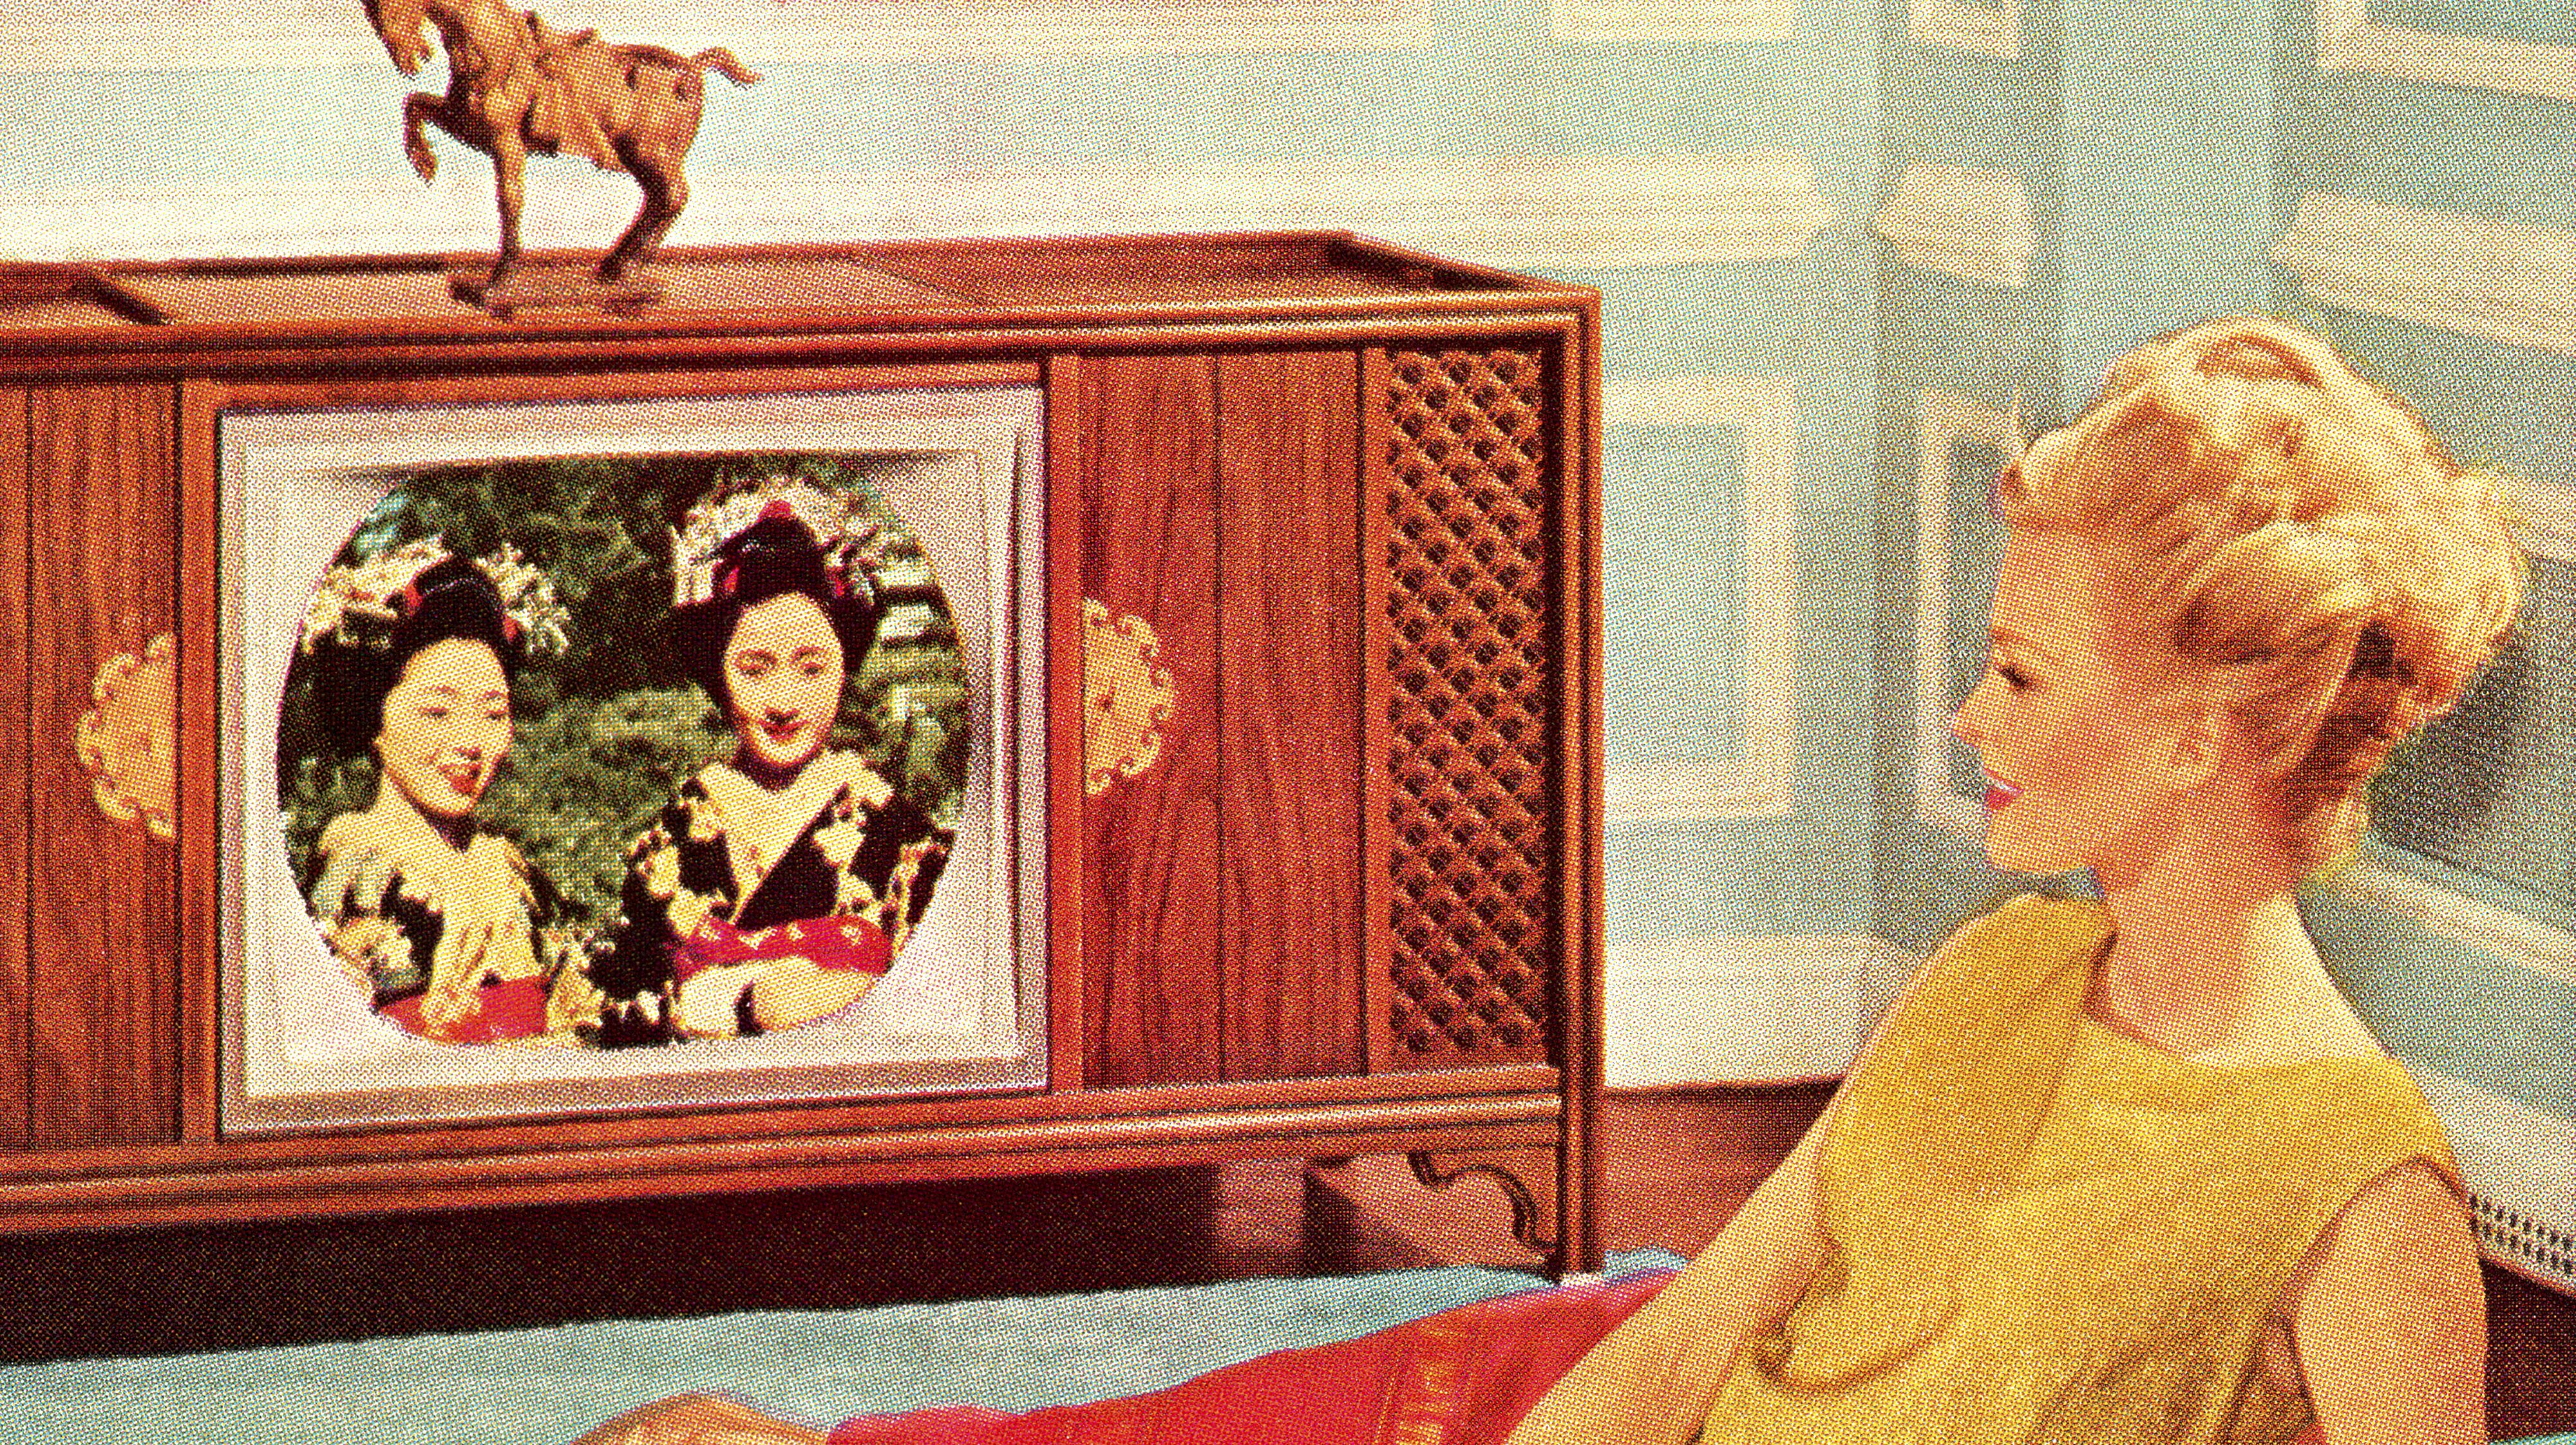 Color Televisions Were All the Rage in the 1960s (They Were Also